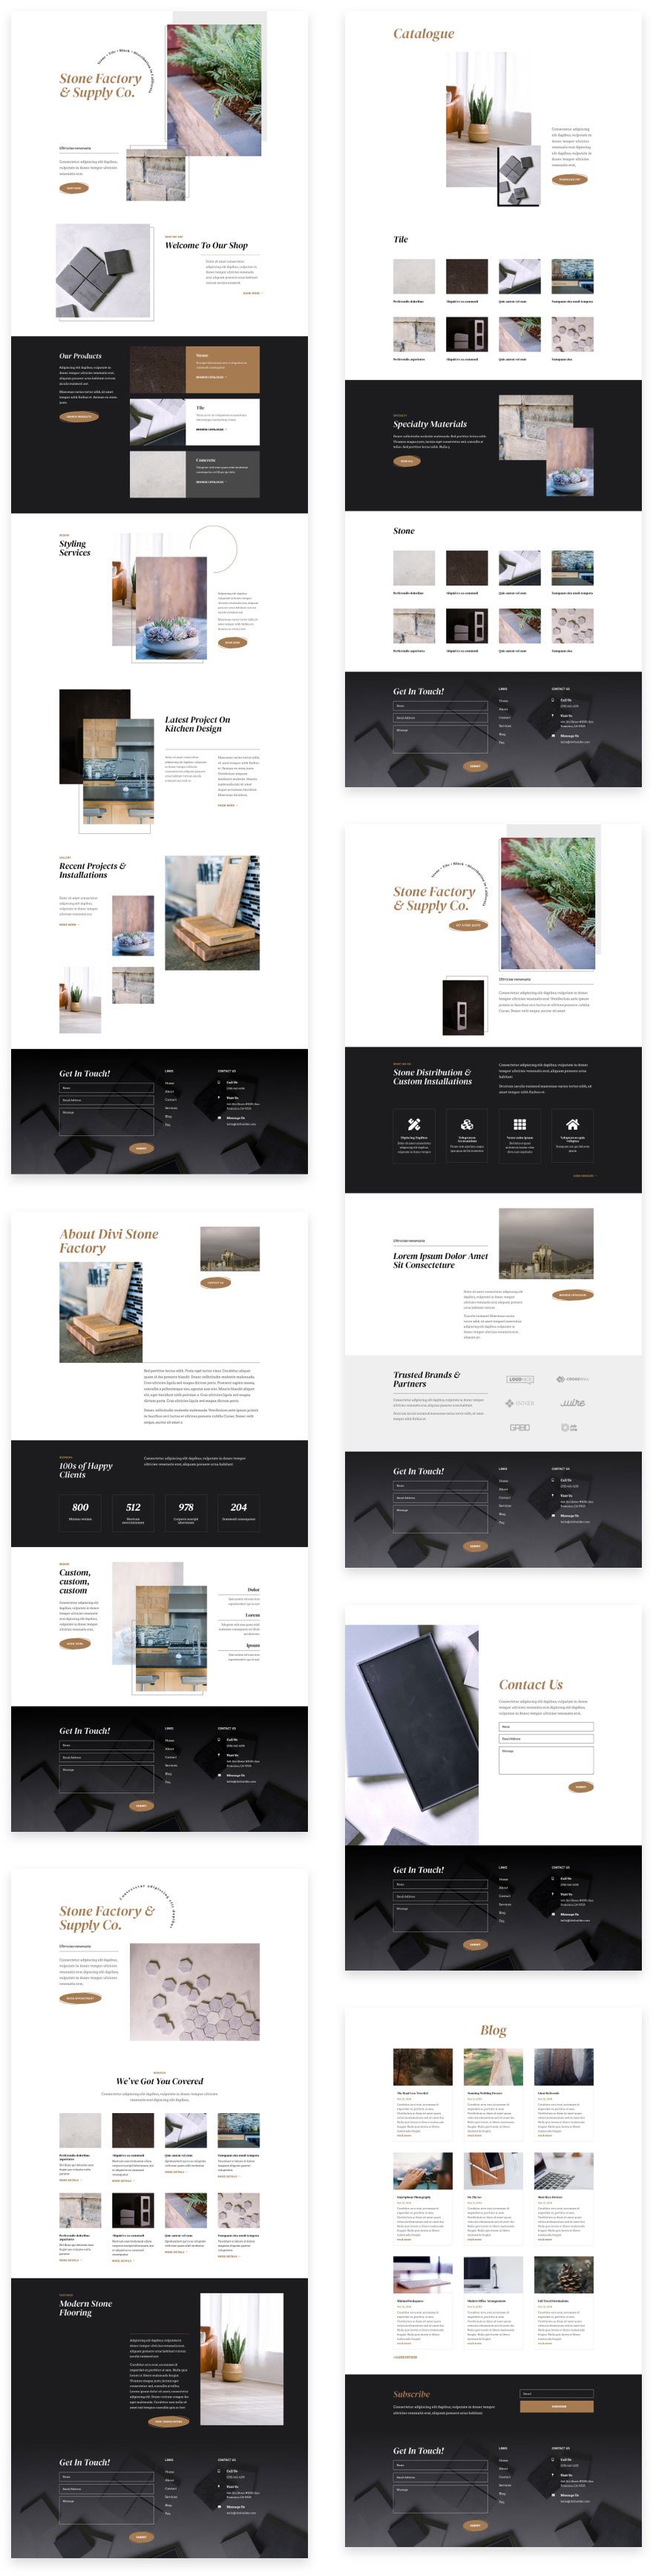 get-a-a-free-stone-factory-layout-pack-for-divi 獲得 Divi 的免費 Stone Factory 布局包